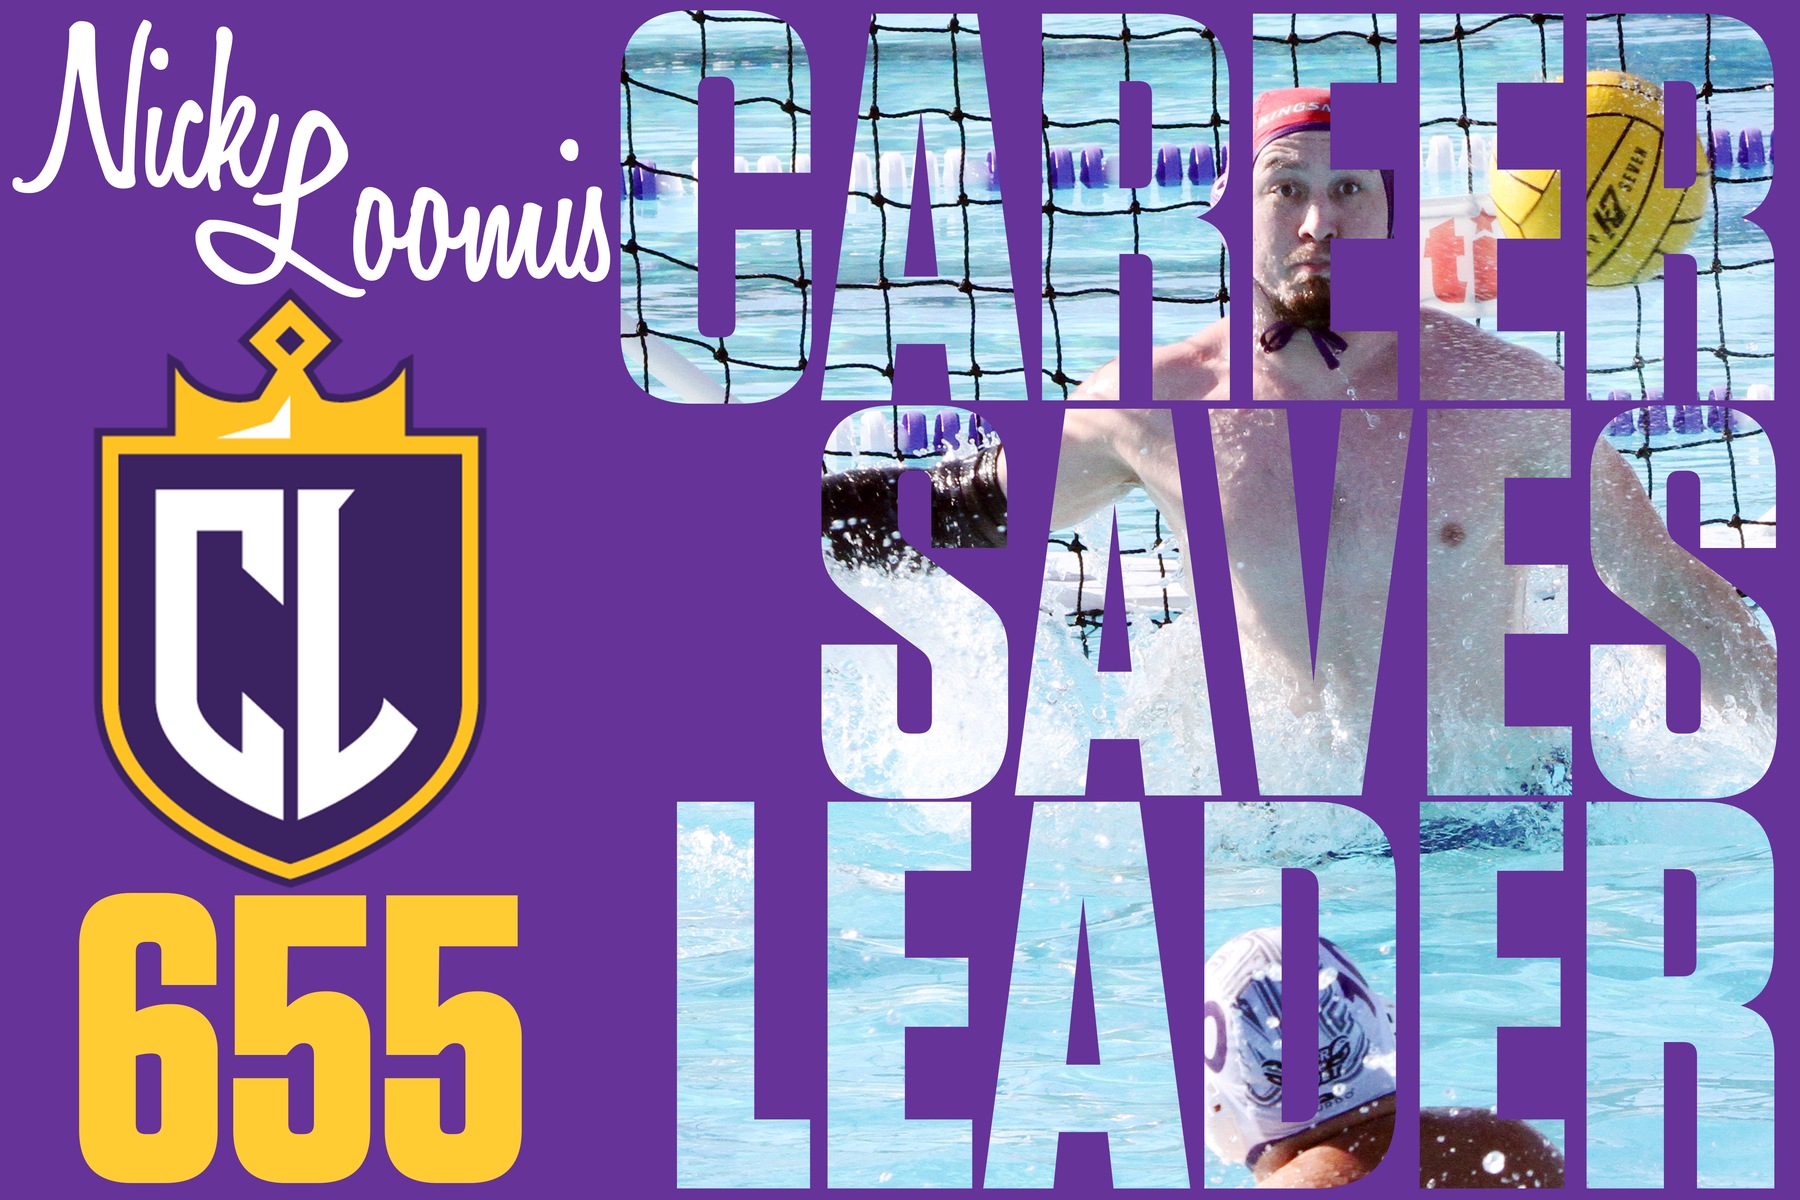 Nick Loomis set a new CLU career saves record today with 655 over two-and-a-half years (Photo: Tracy L. Olson).